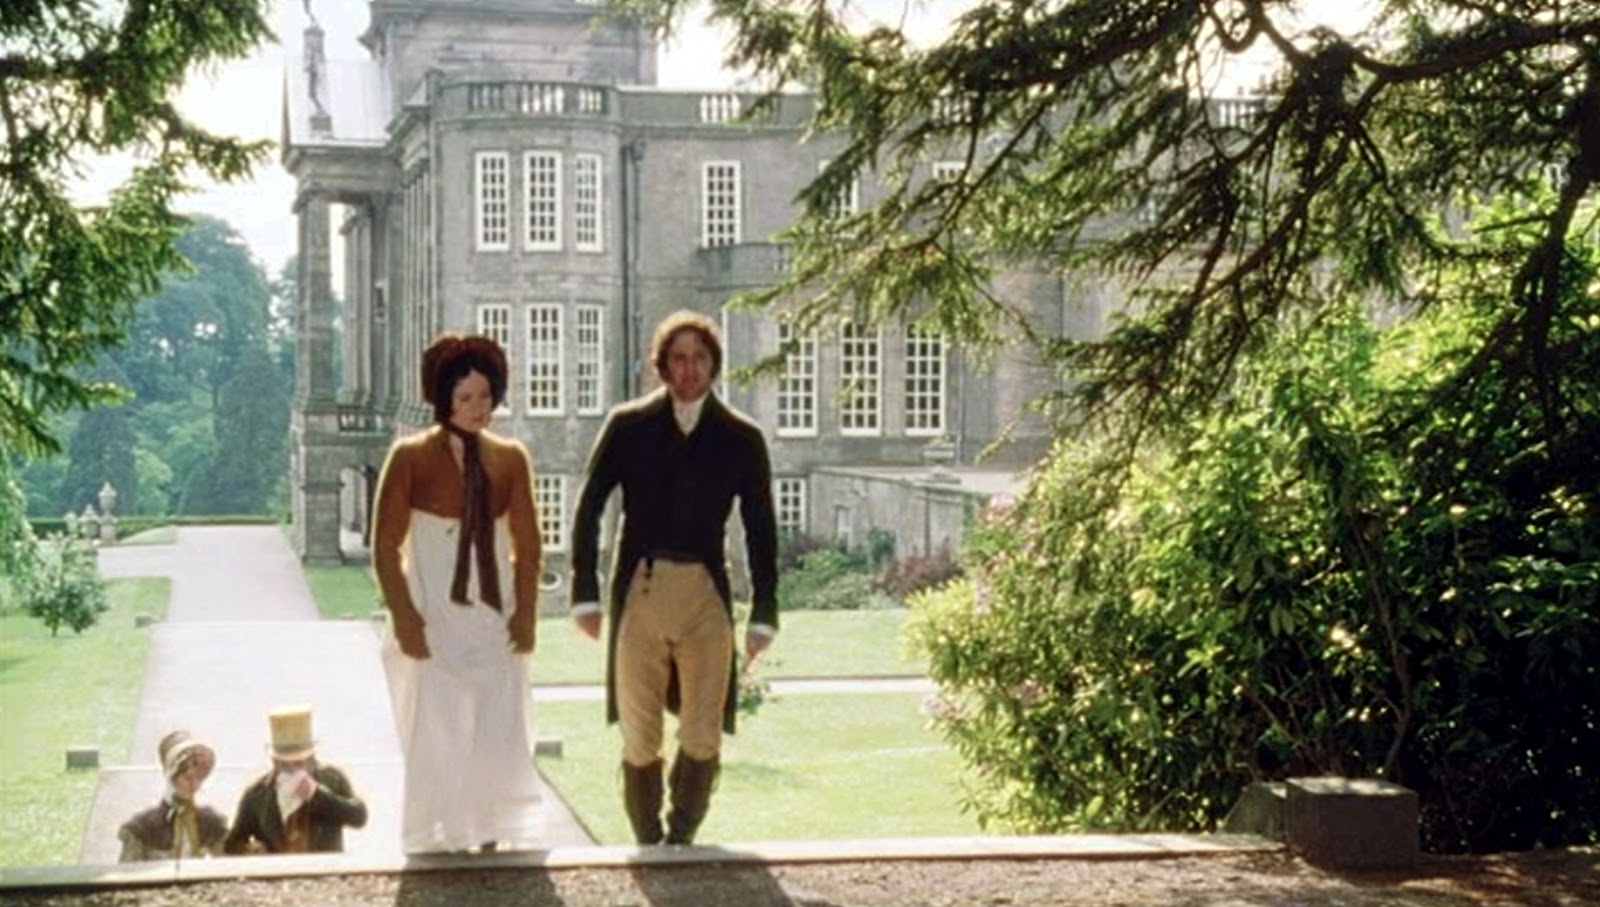 I felt like I was in Pride and Prejudice walking over the two